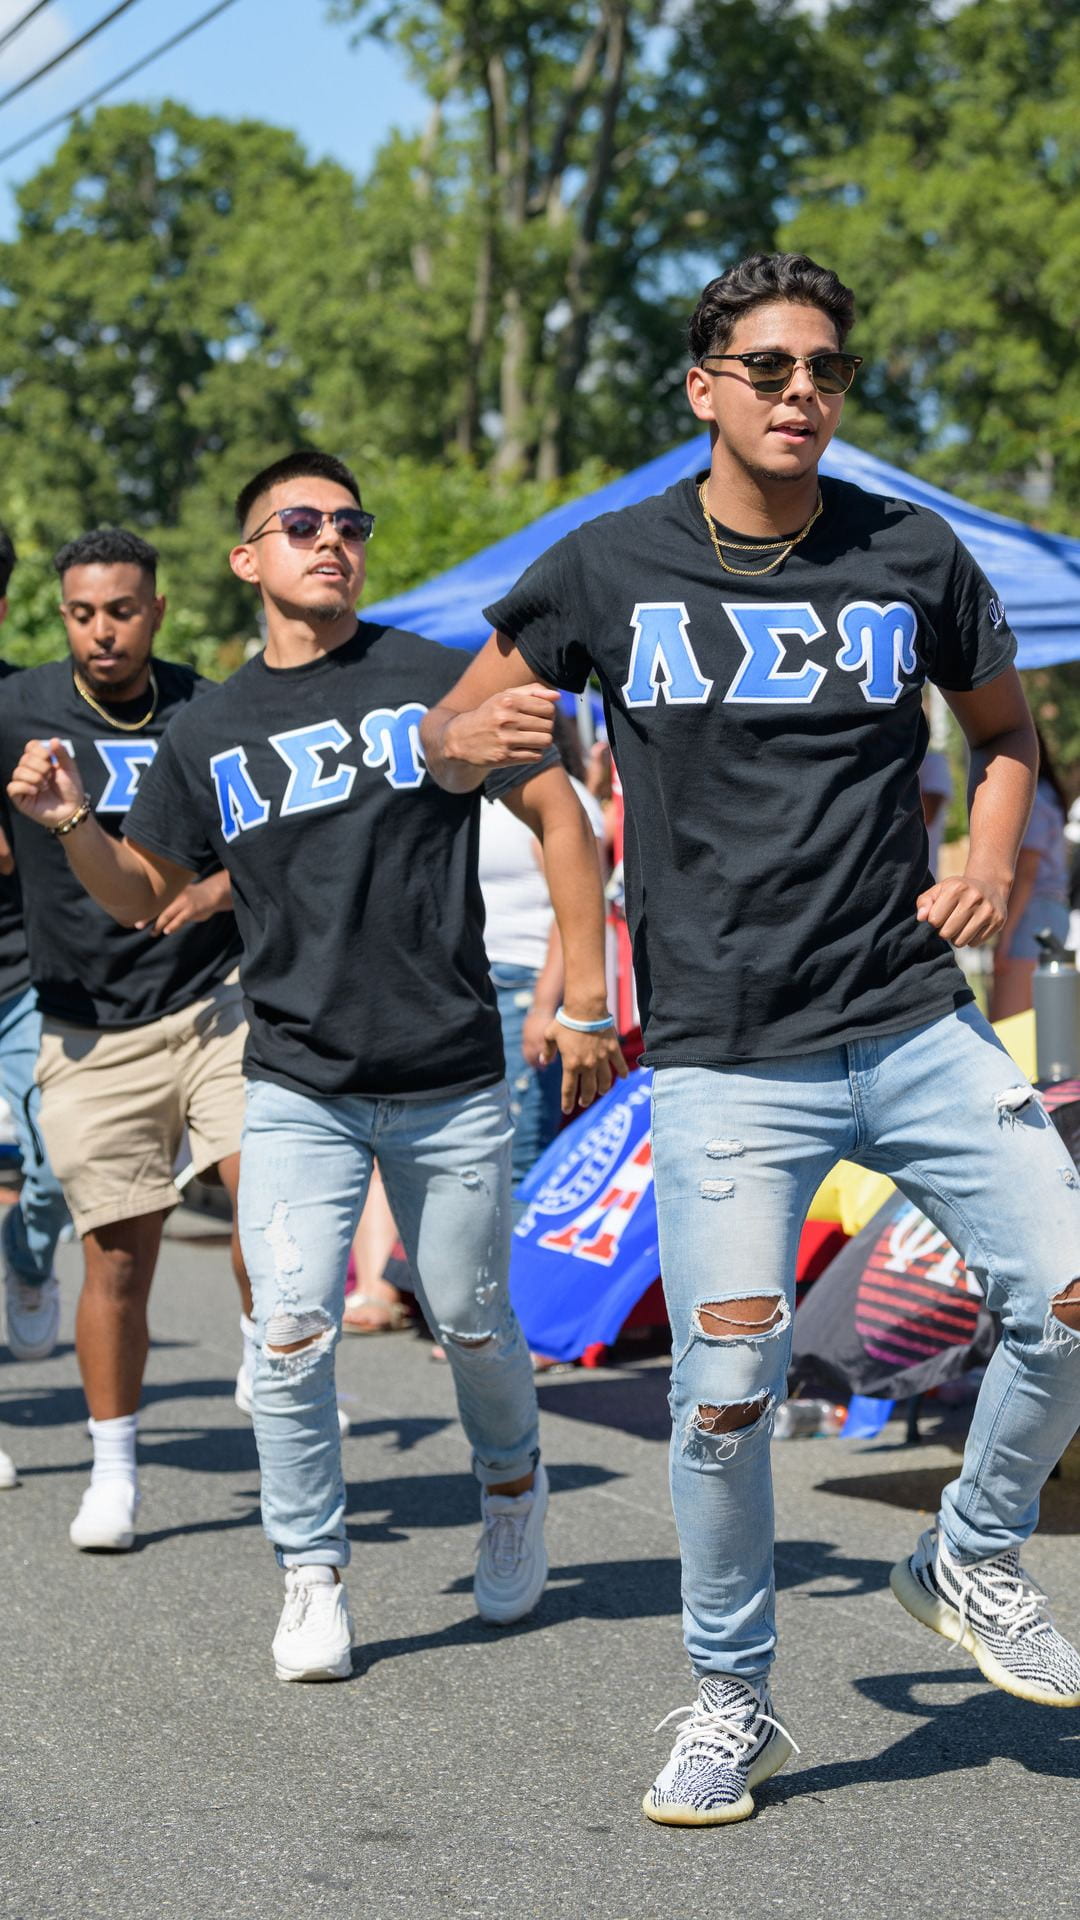 Fraternity members perform during the Involvement Fair